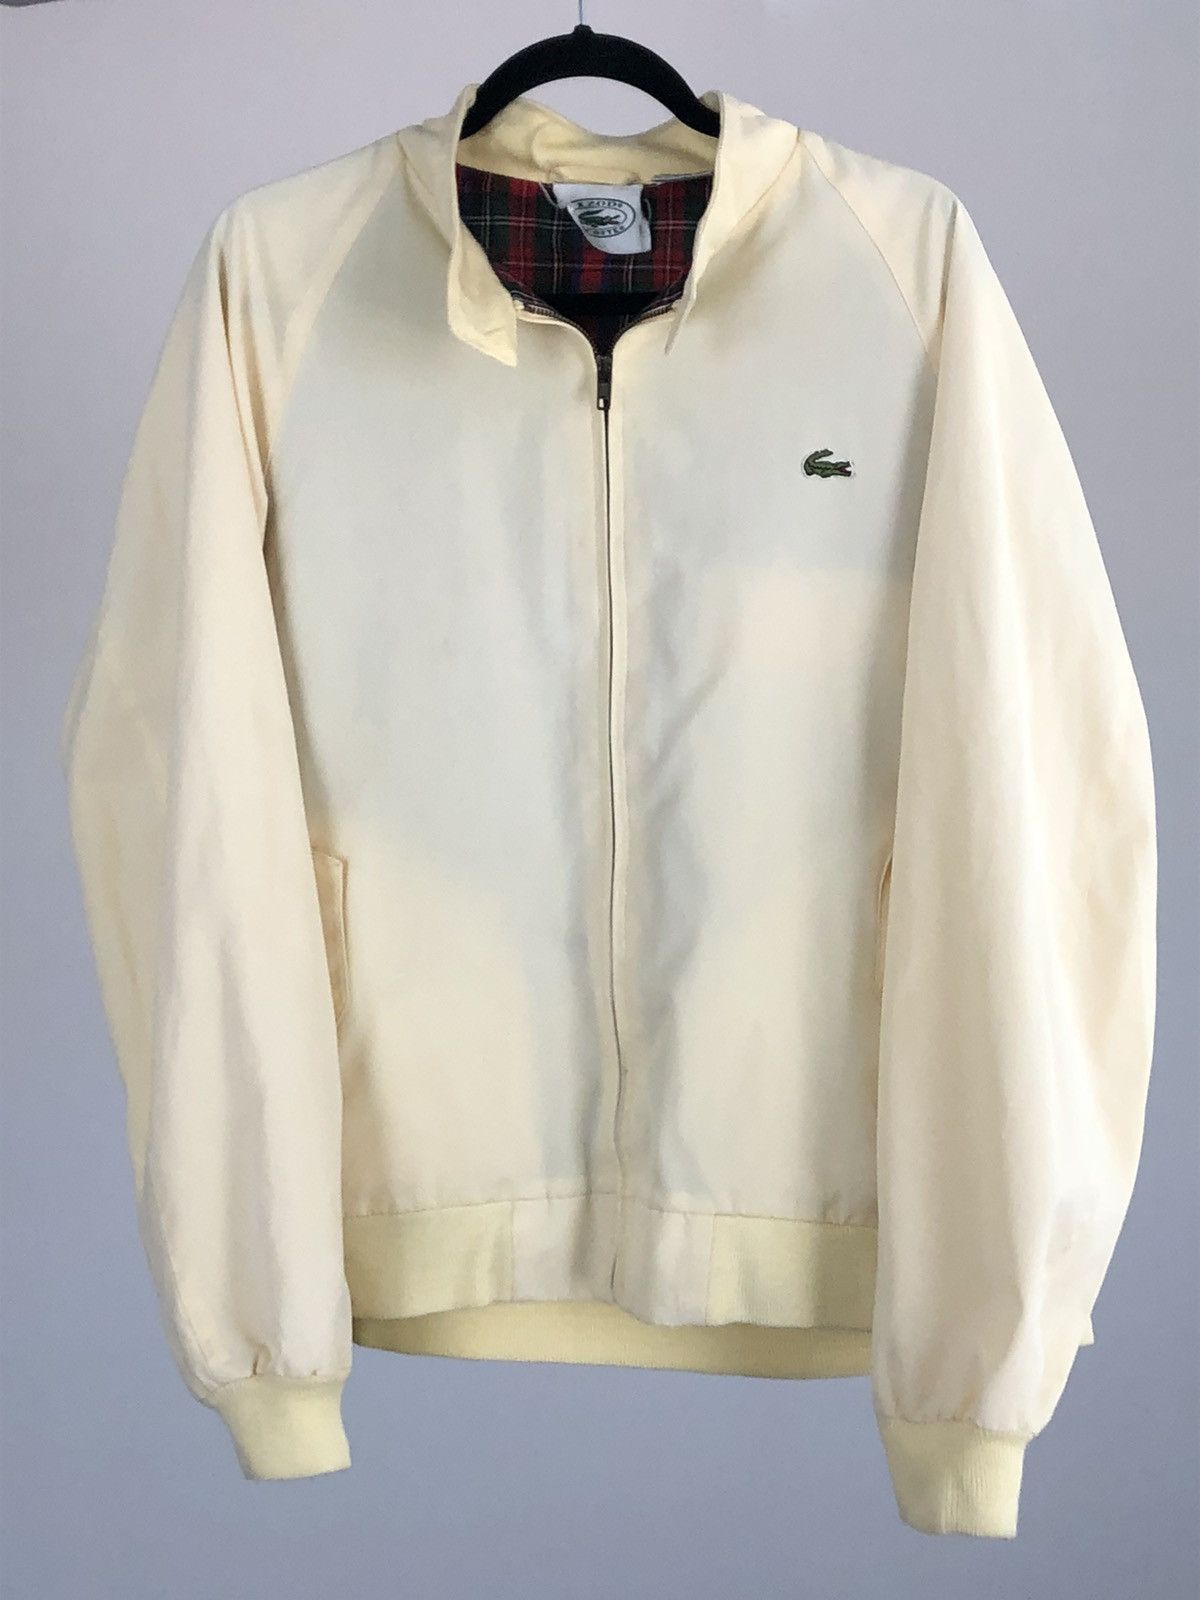 Lacoste Light Golf Jacket in Pale Yellow Size US L / EU 52-54 / 3 - 1 Preview